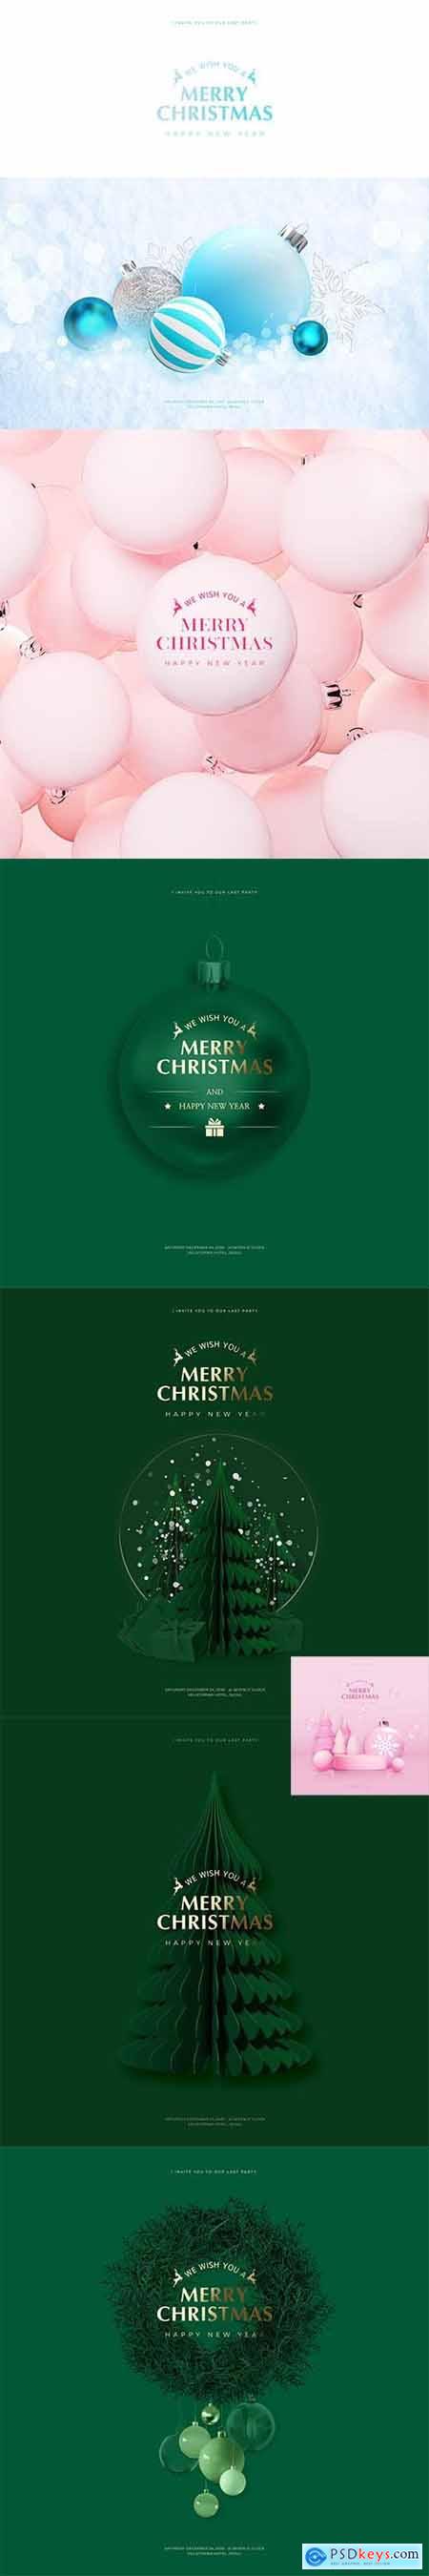 Merry christmas and happy new year greeting card template